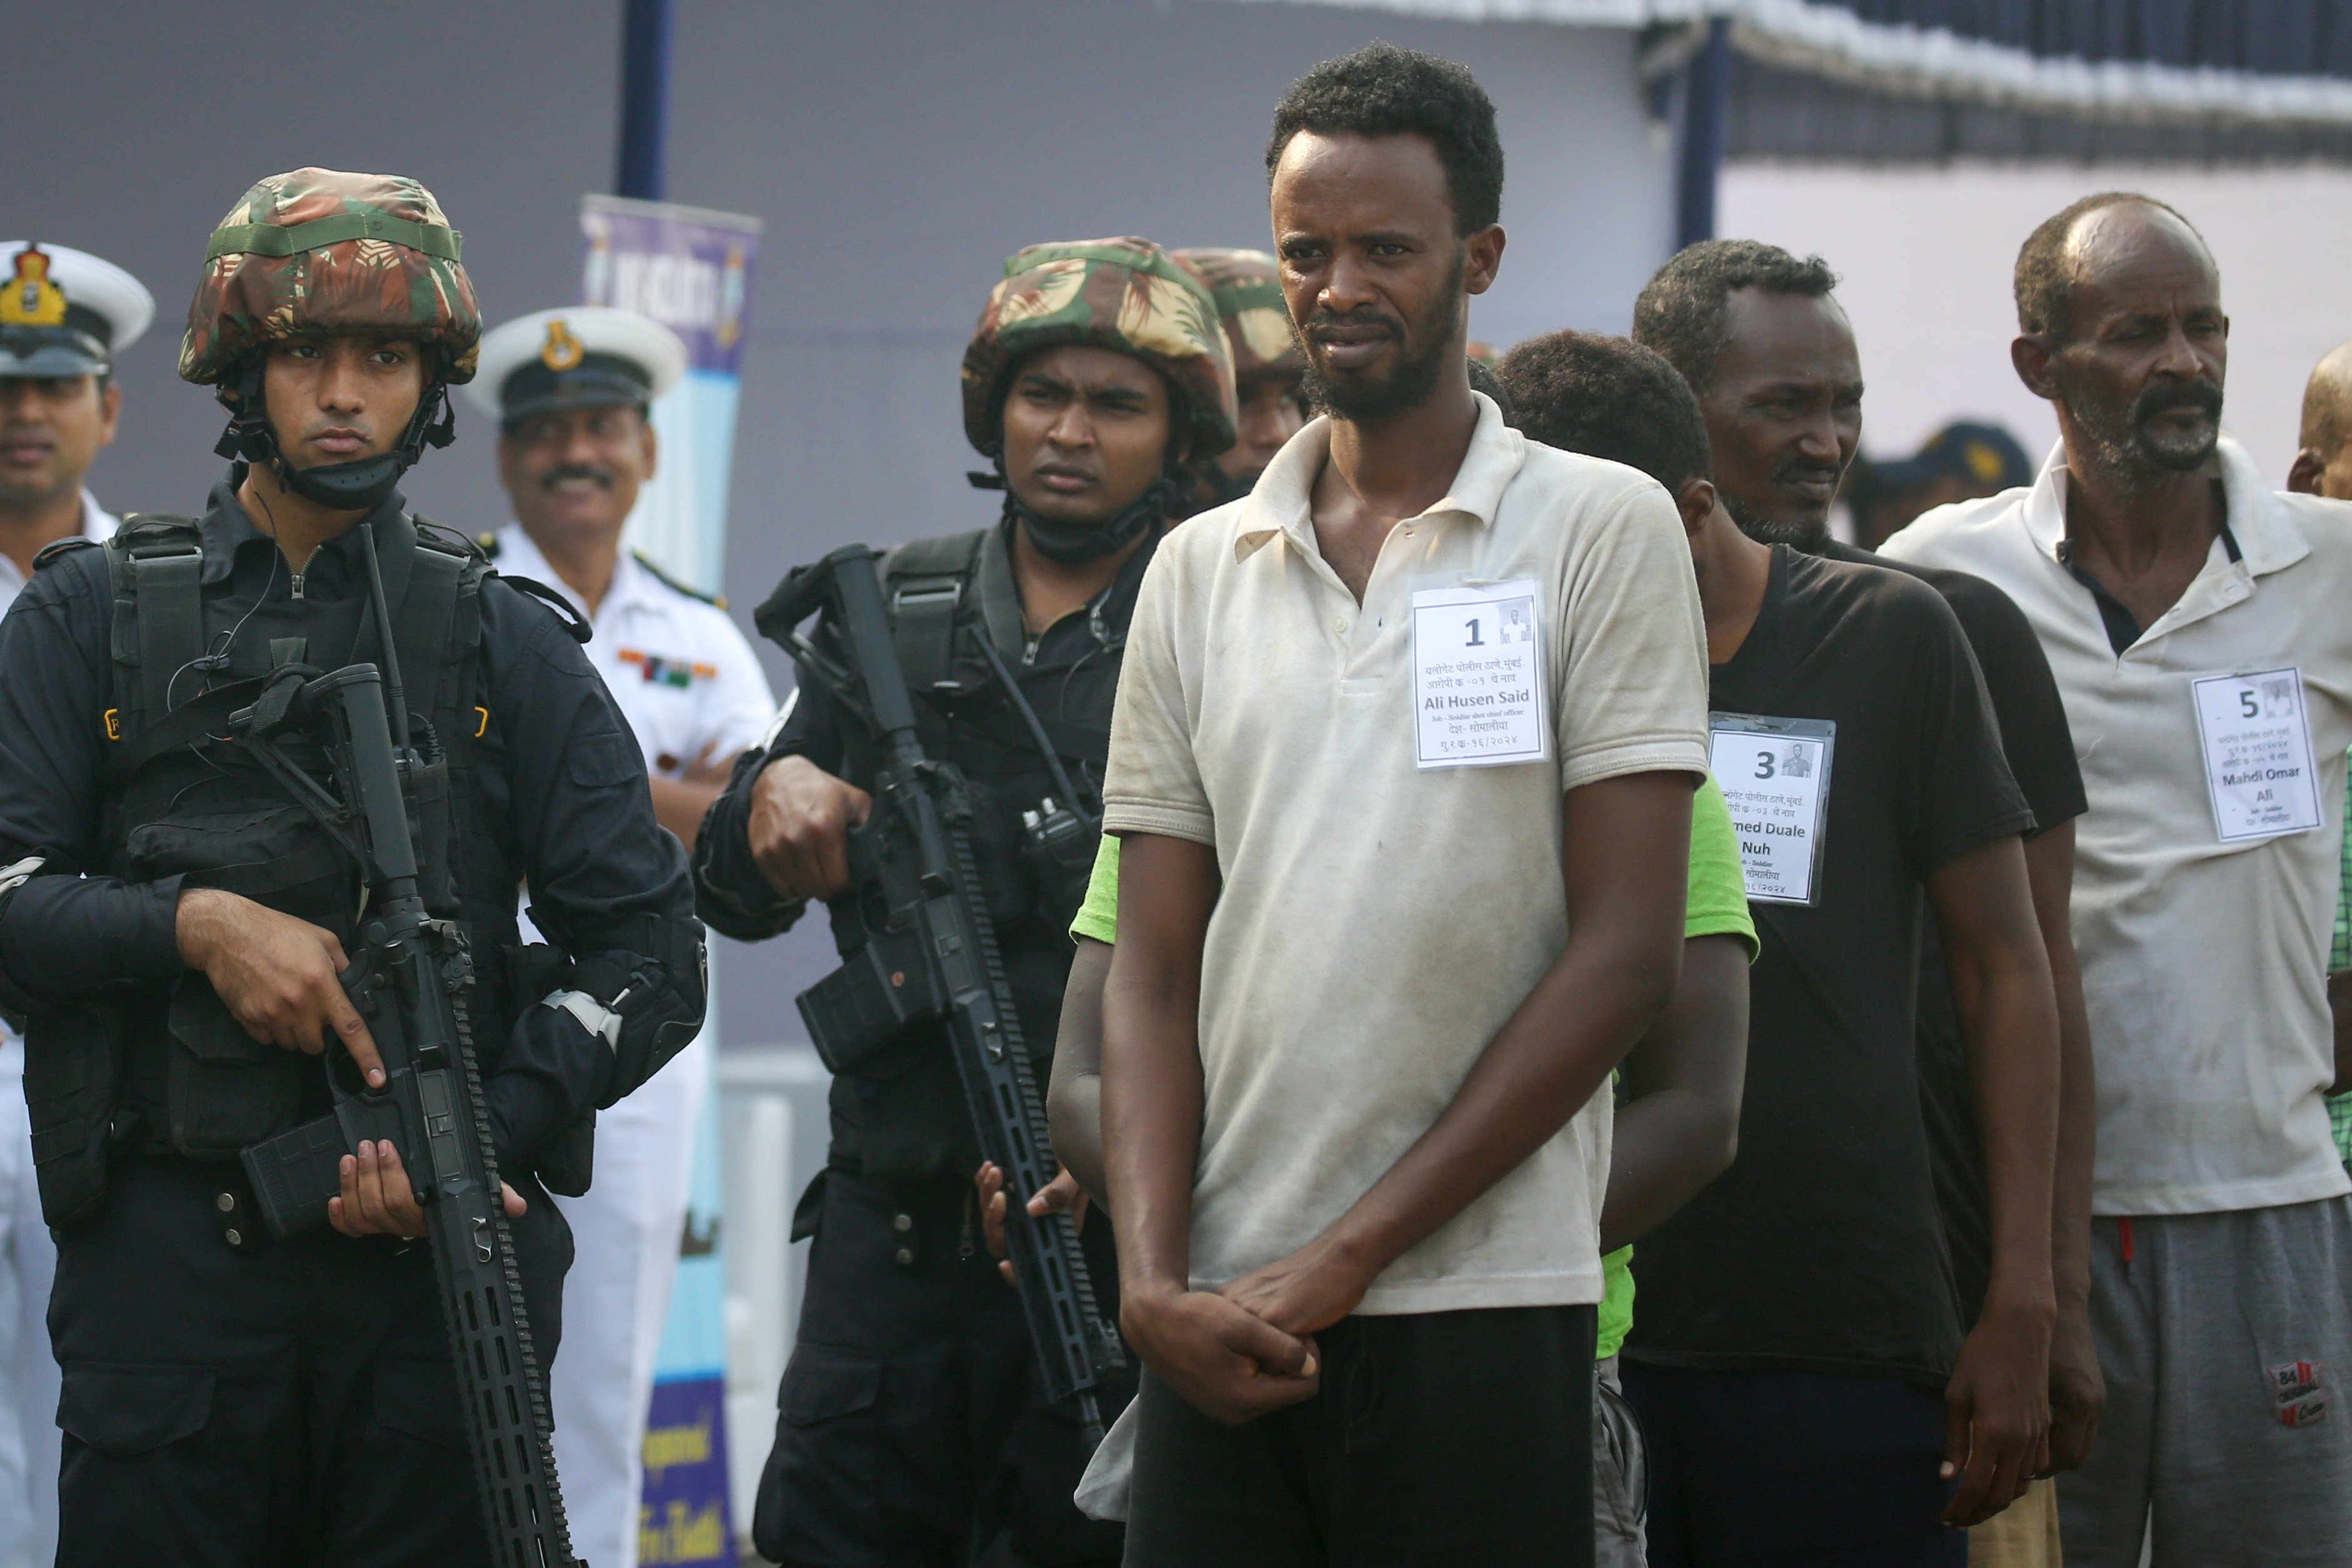 A group of suspected Somali pirates captured by the Indian Navy and presented to the media in Mumbai on March 23. Photo: EPA-EFE